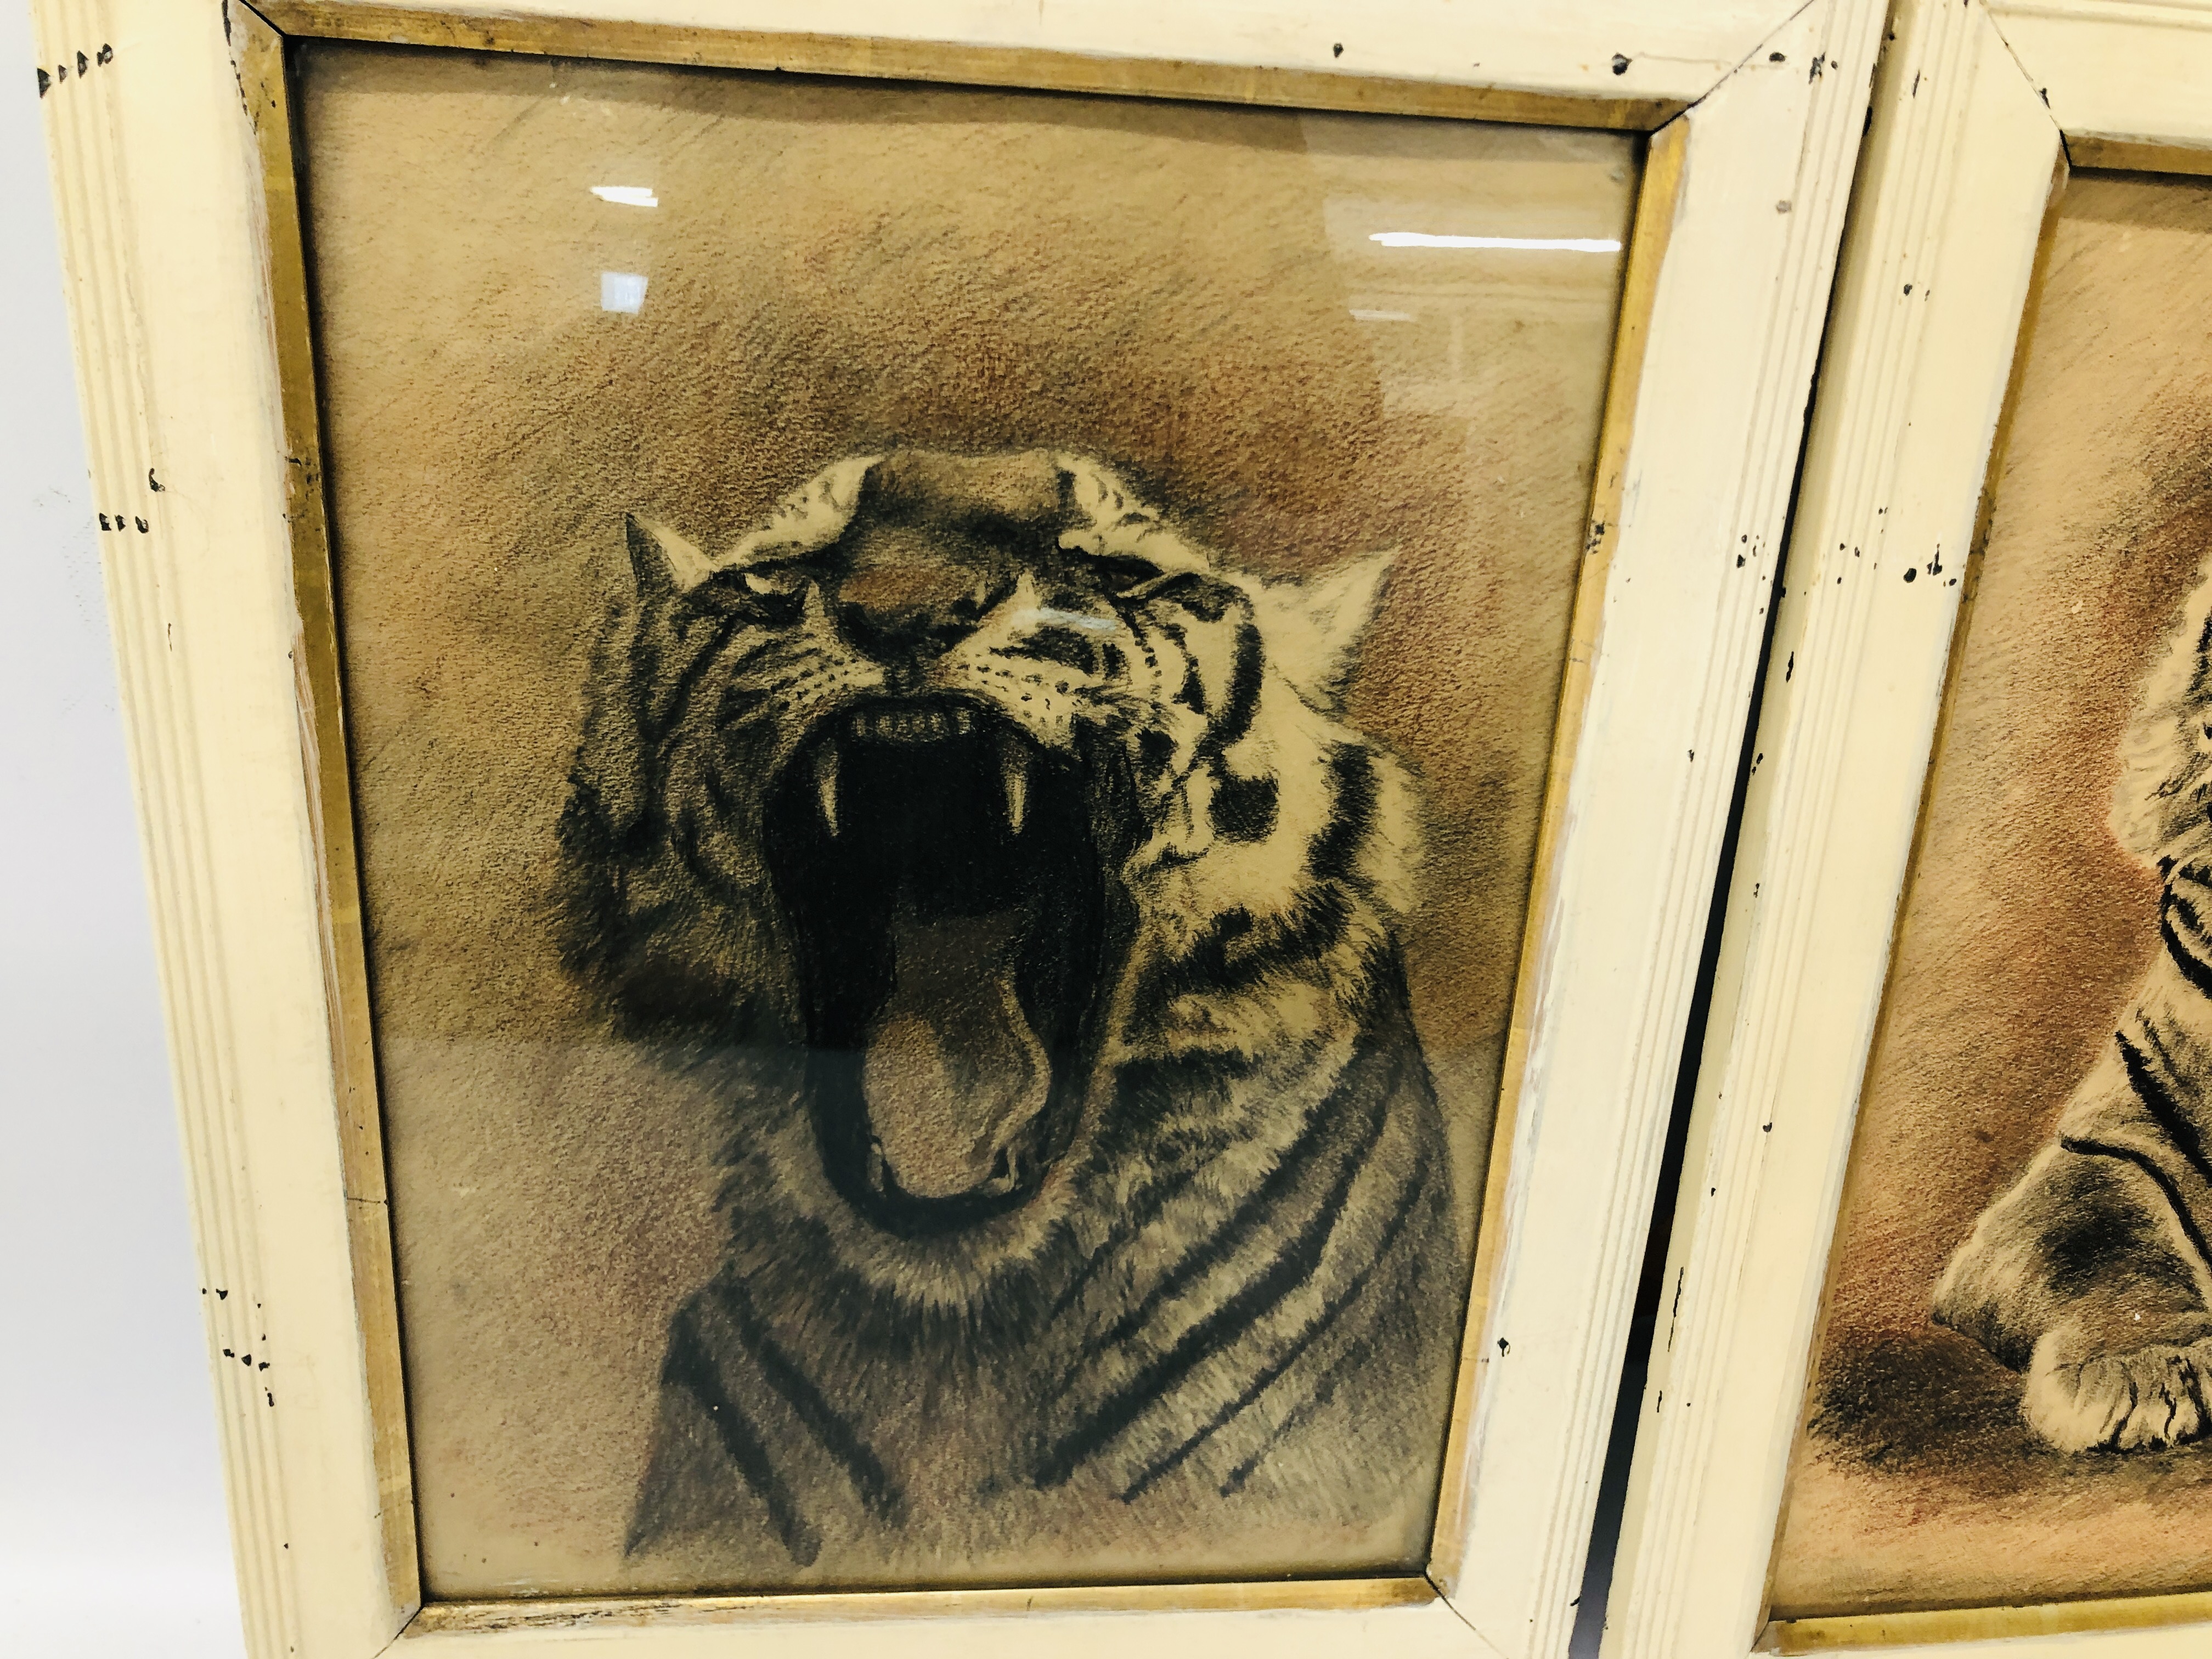 A PAIR OF ORIGINAL CHARCOAL DRAWINGS OF TIGERS, NO VISIBLE SIGNATURE, EACH H 44CM X W 31.5CM. - Image 3 of 3